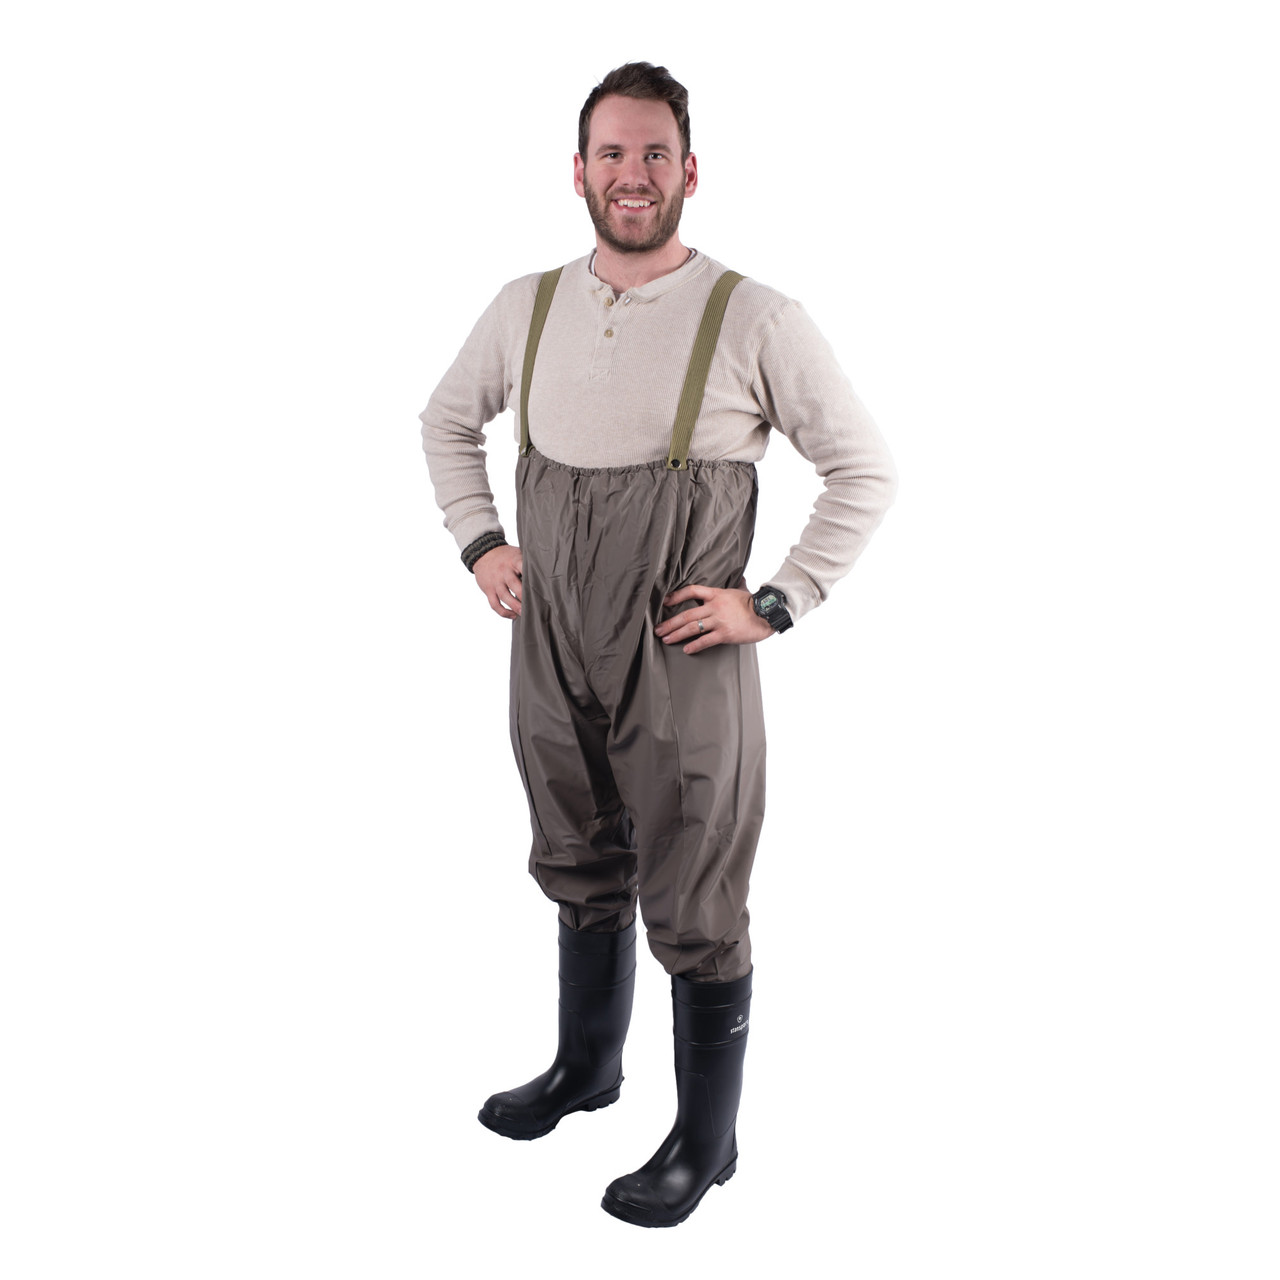 STOCKING FOOT WAIST WADERS WITH WADING BOOTS MEDIUM 10 FELT SOLE :  : Sports & Outdoors